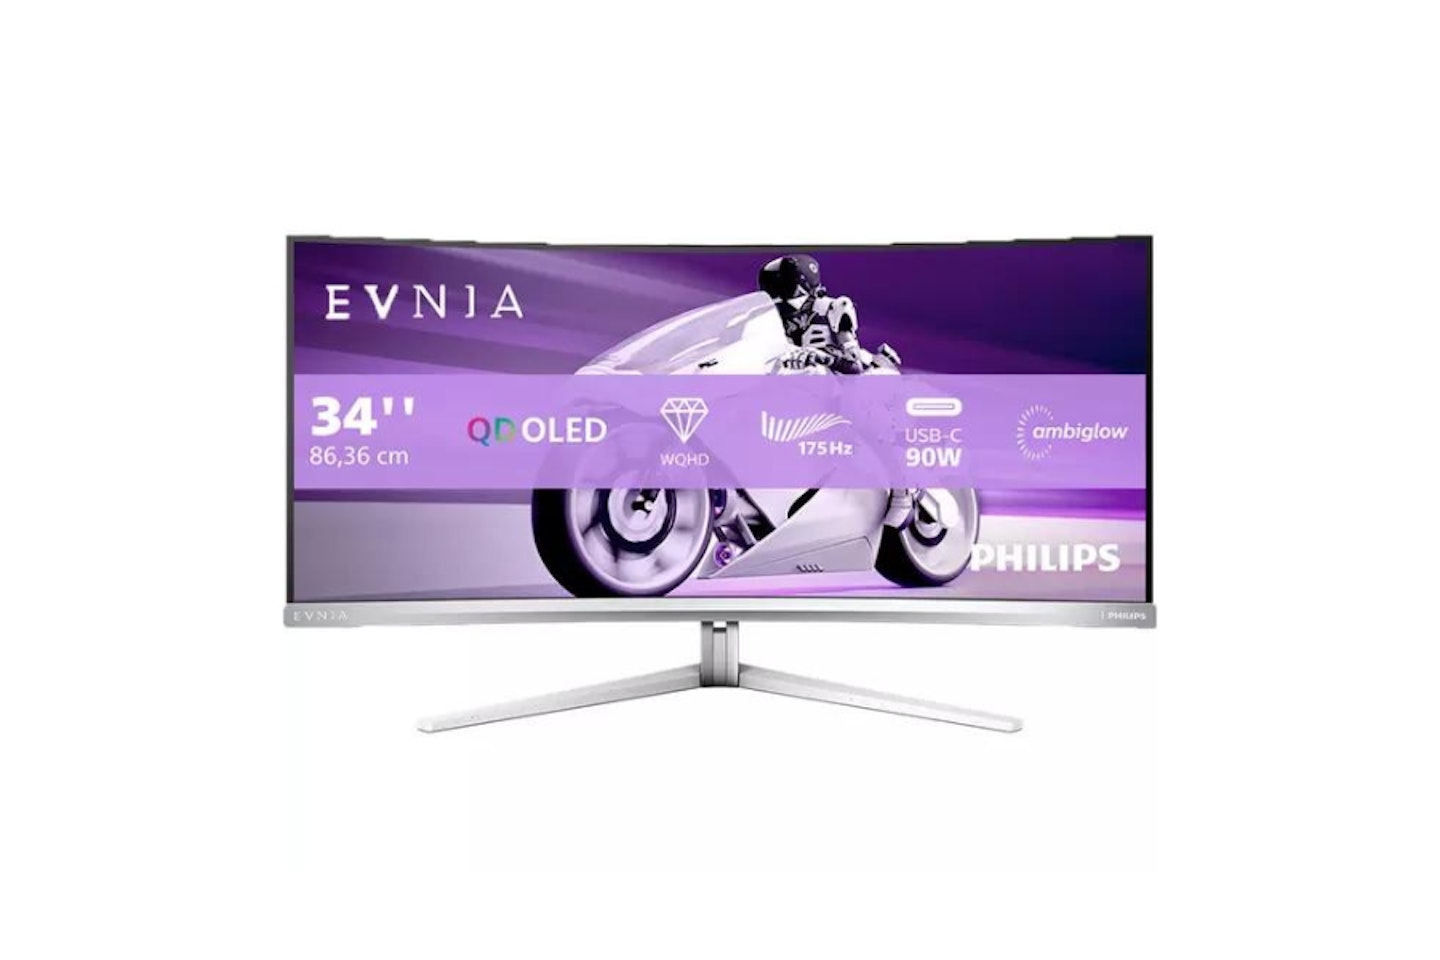 PHILIPS Evnia 34M2C8600 Quad HD 34-inch Curved Quantum Dot OLED Gaming Monitor - Silver